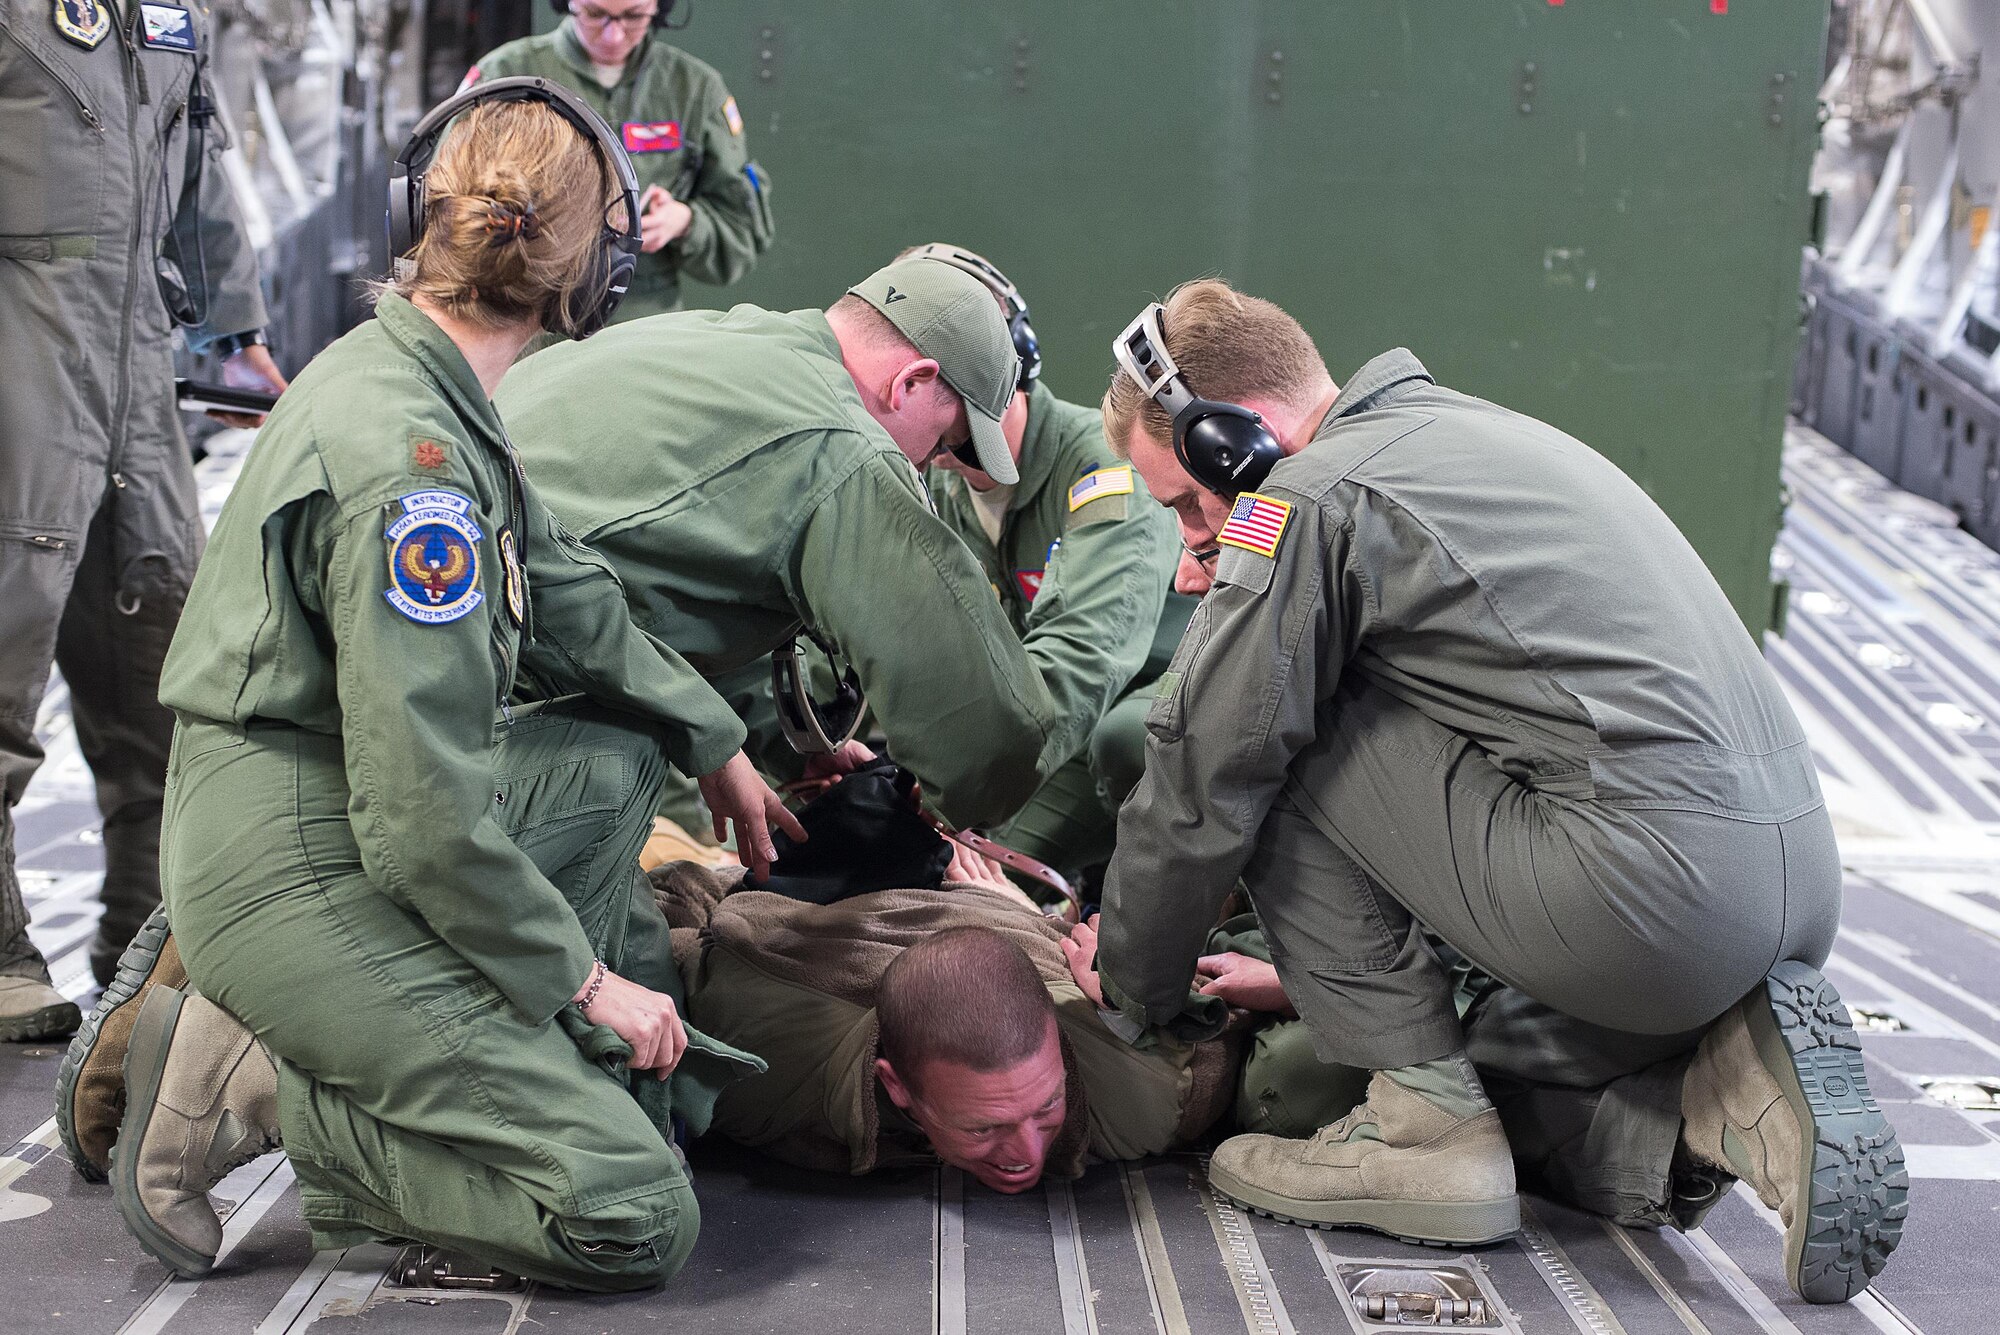 Master Sgt. Joshua Manhart, a volunteer simulated patient, simulates having a mental breakdown and being restrained by aeromedical technicians from the 146th Aeromedical Evacuation Squadron, California Air National Guard, while training on a C-17 Globemaster III during the Multiple Aircraft Training Opportunity Program (MATOP) organized by the 137th Aeromedical Evacuation Squadron from Will Rogers Air National Guard Base, Oklahoma City, April 7, 2017. Airmen of the 137 AES were joined by eight of the nine Air National Guard aeromedical evacuation squadrons as they hosted the annual training event and accomplished mandatory annual aeromedical training requirements. (U.S. Air National Guard photo by Senior Master Sgt. Andrew M. LaMoreaux/Released)